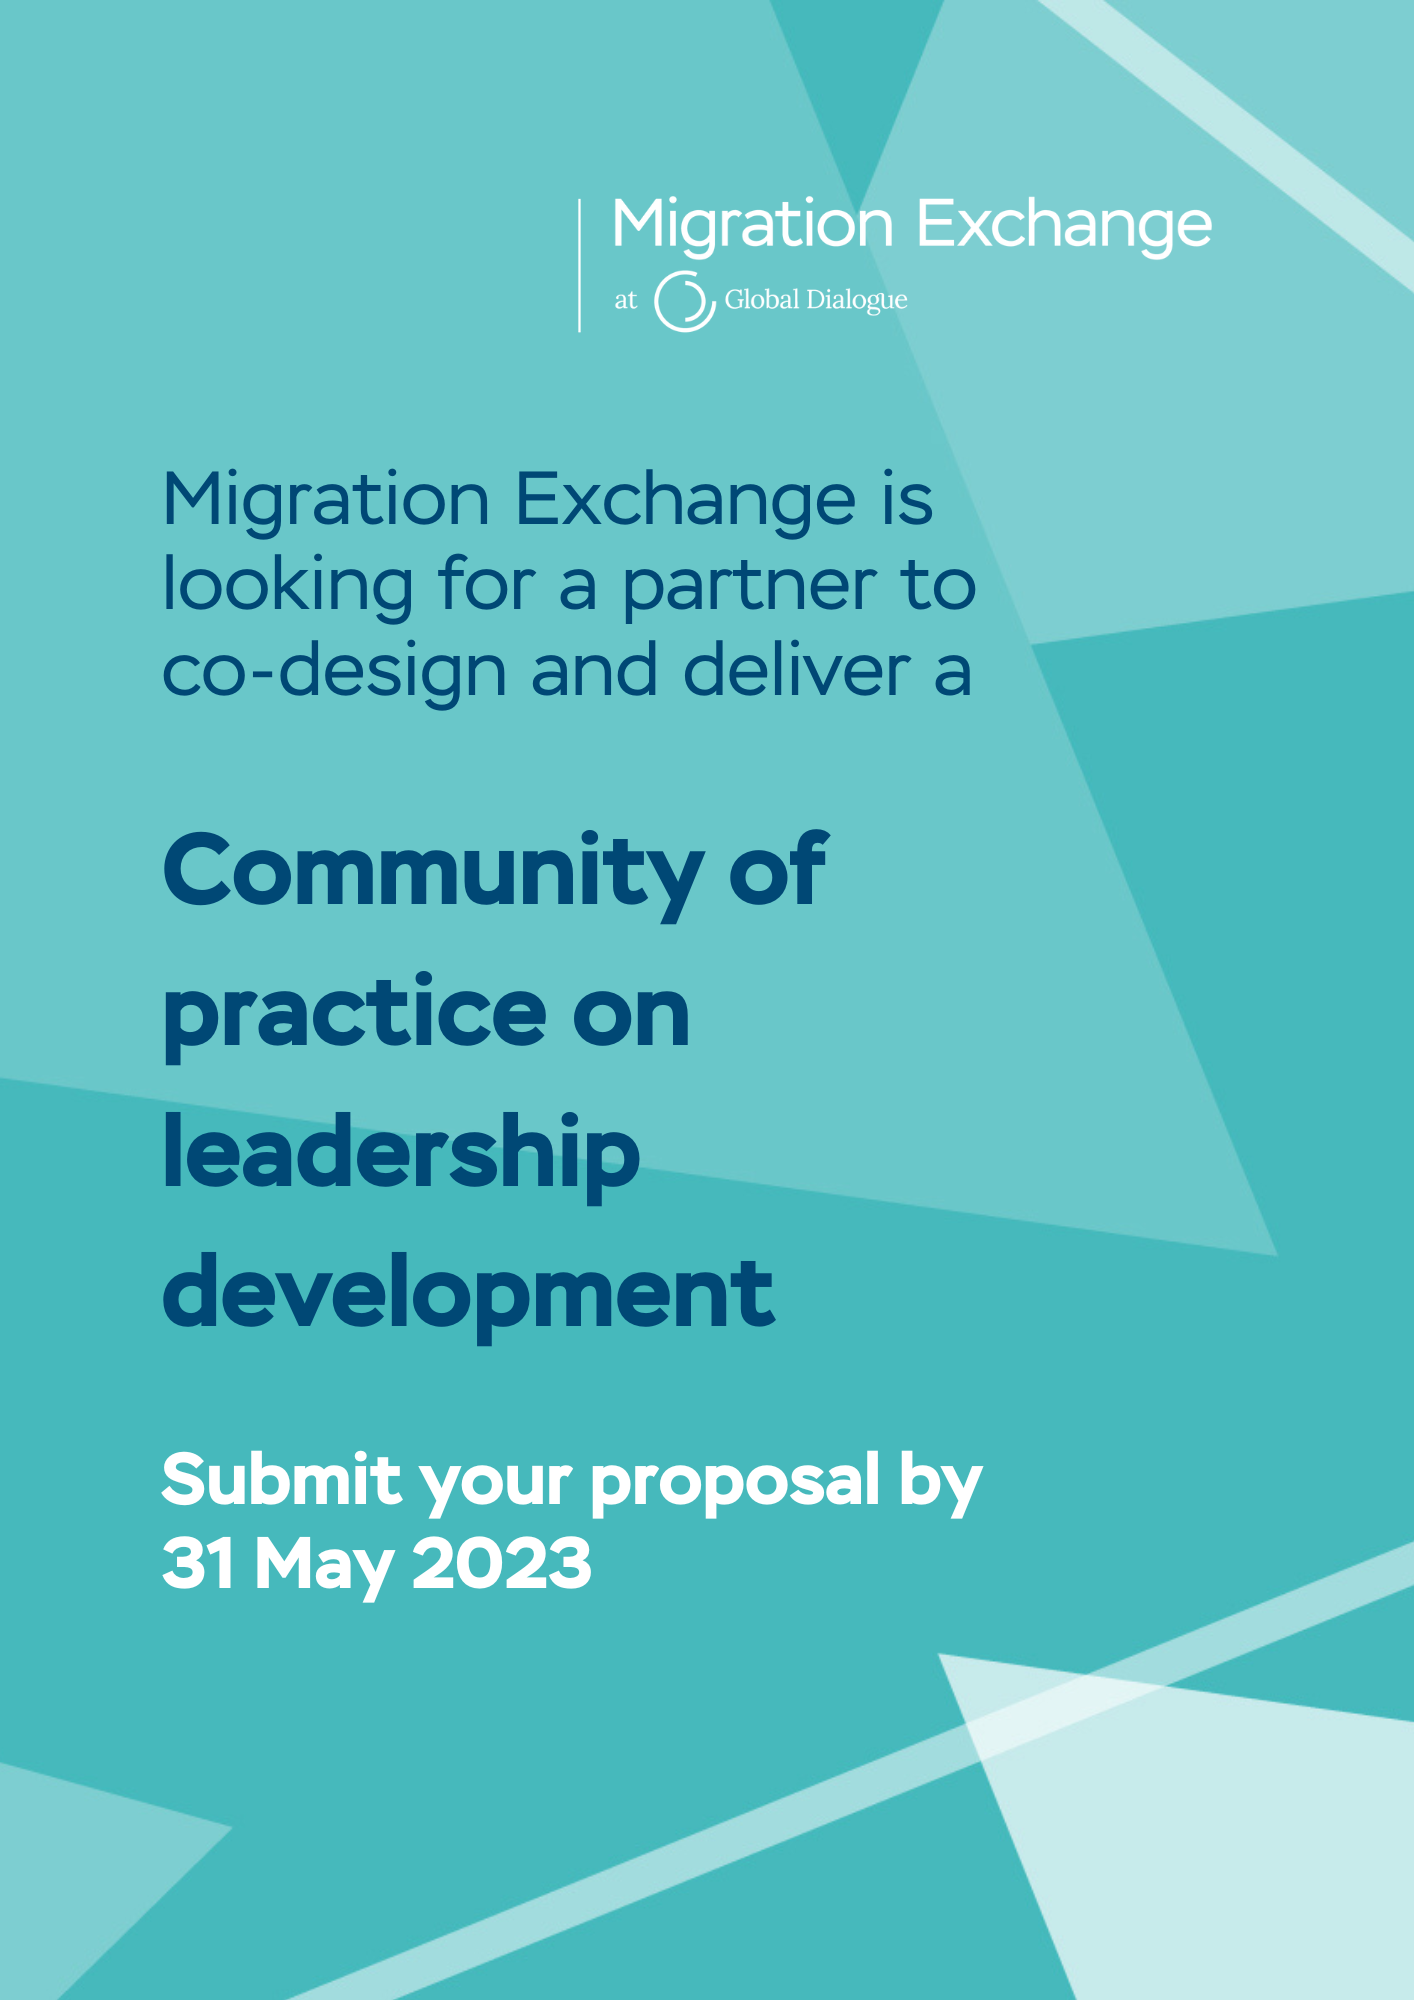 Migration Exchange is looking for a partner to co-design and deliver a<br />
Community of practice on leadership development<br />
Submit your proposal by 31 May 2023